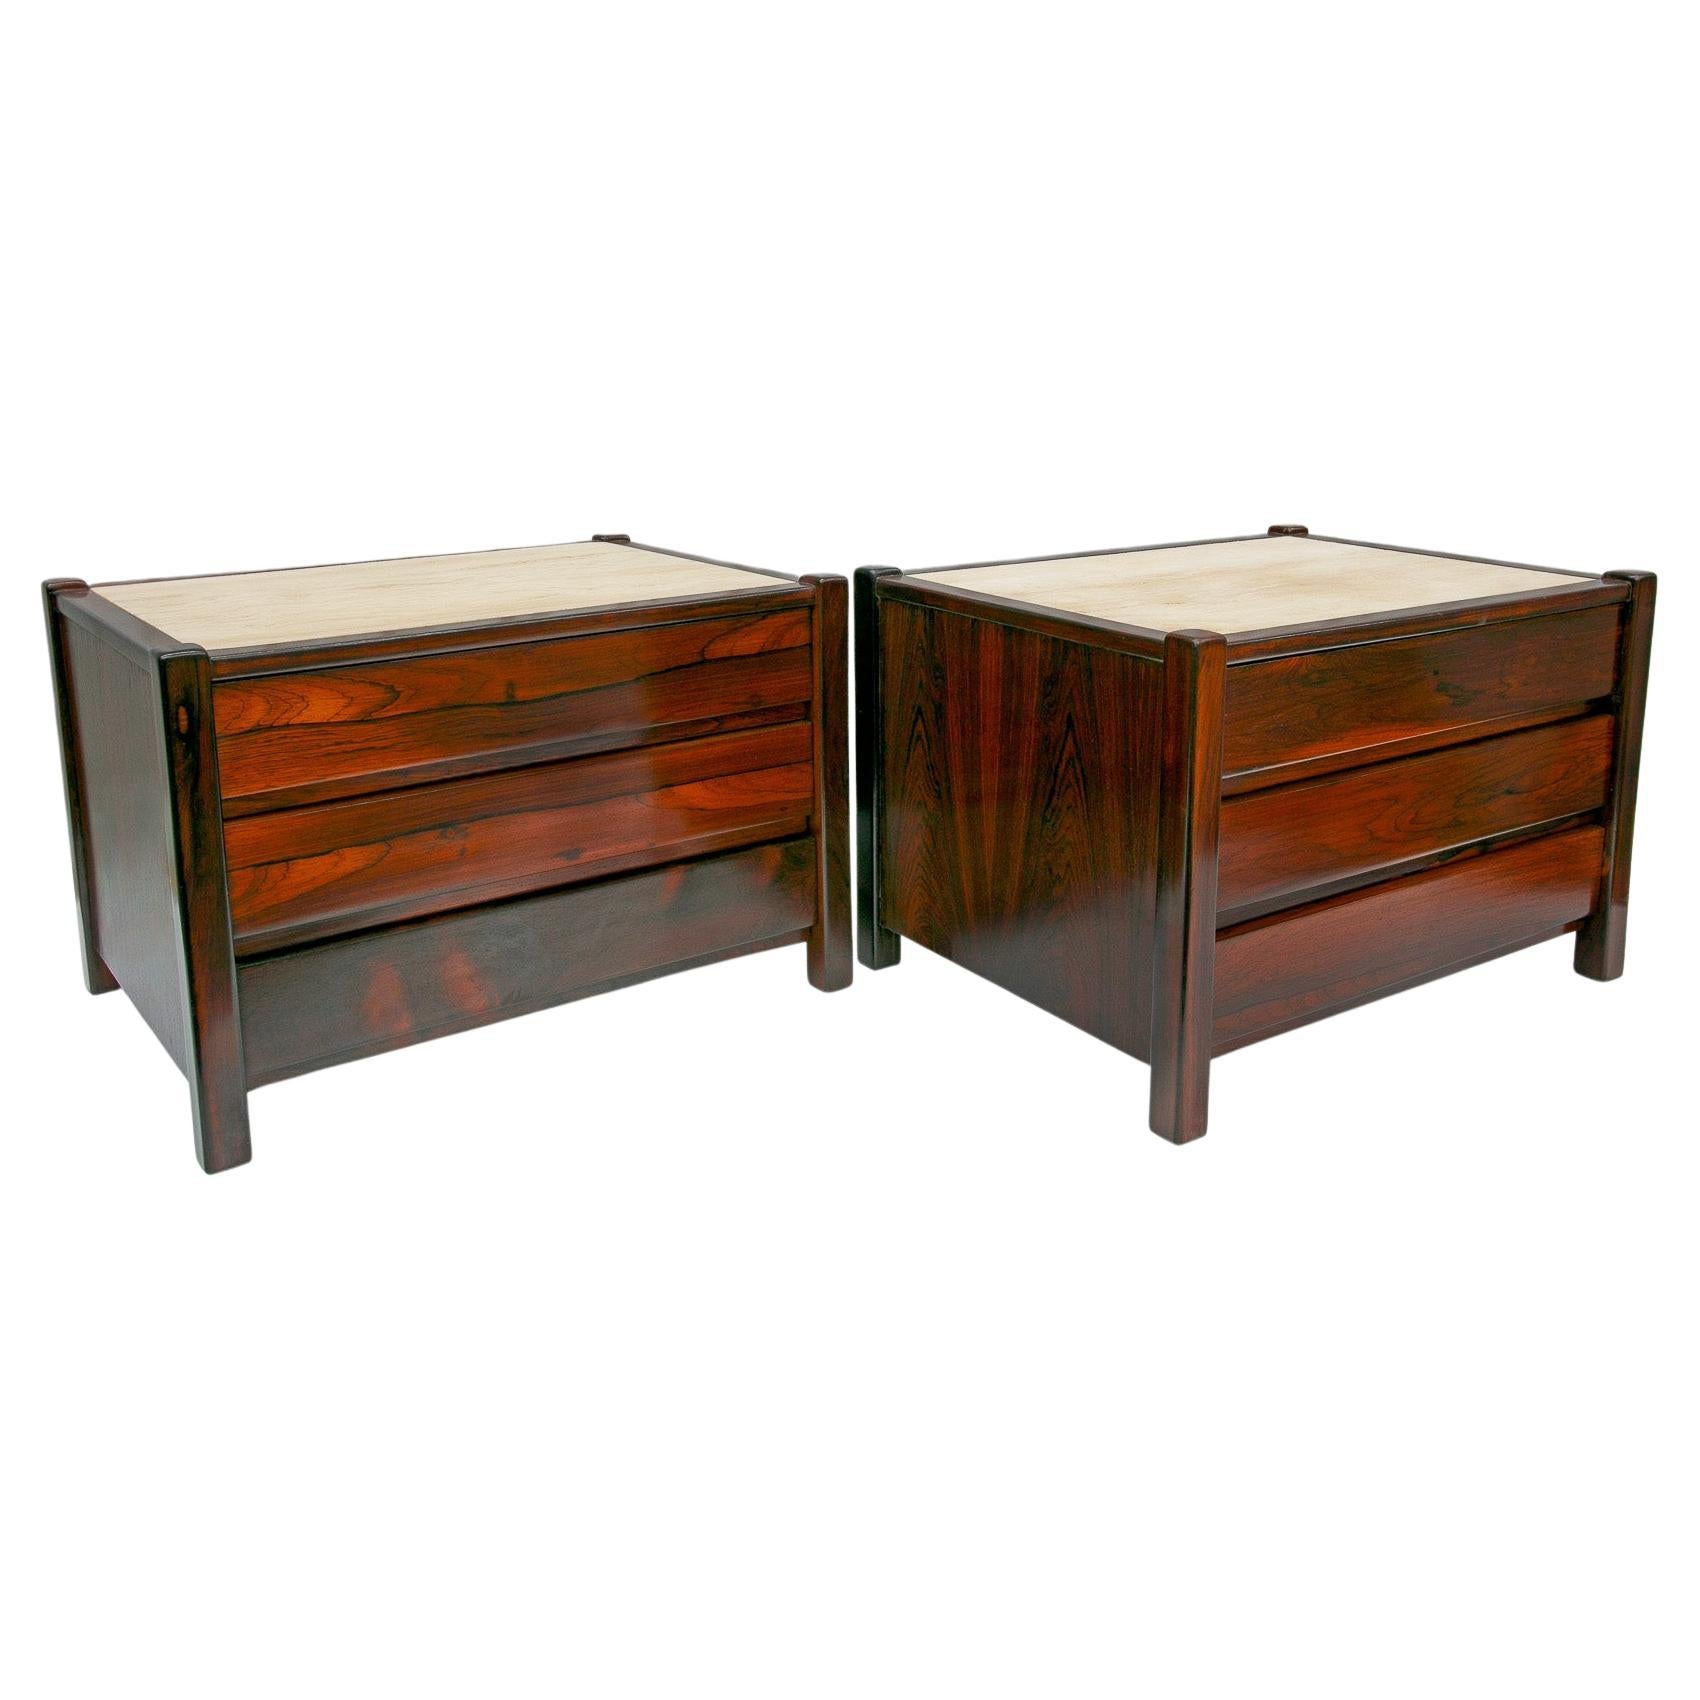 Brazilian Modern Side Tables Set with Drawers, Travertine & Hardwood by Celina For Sale